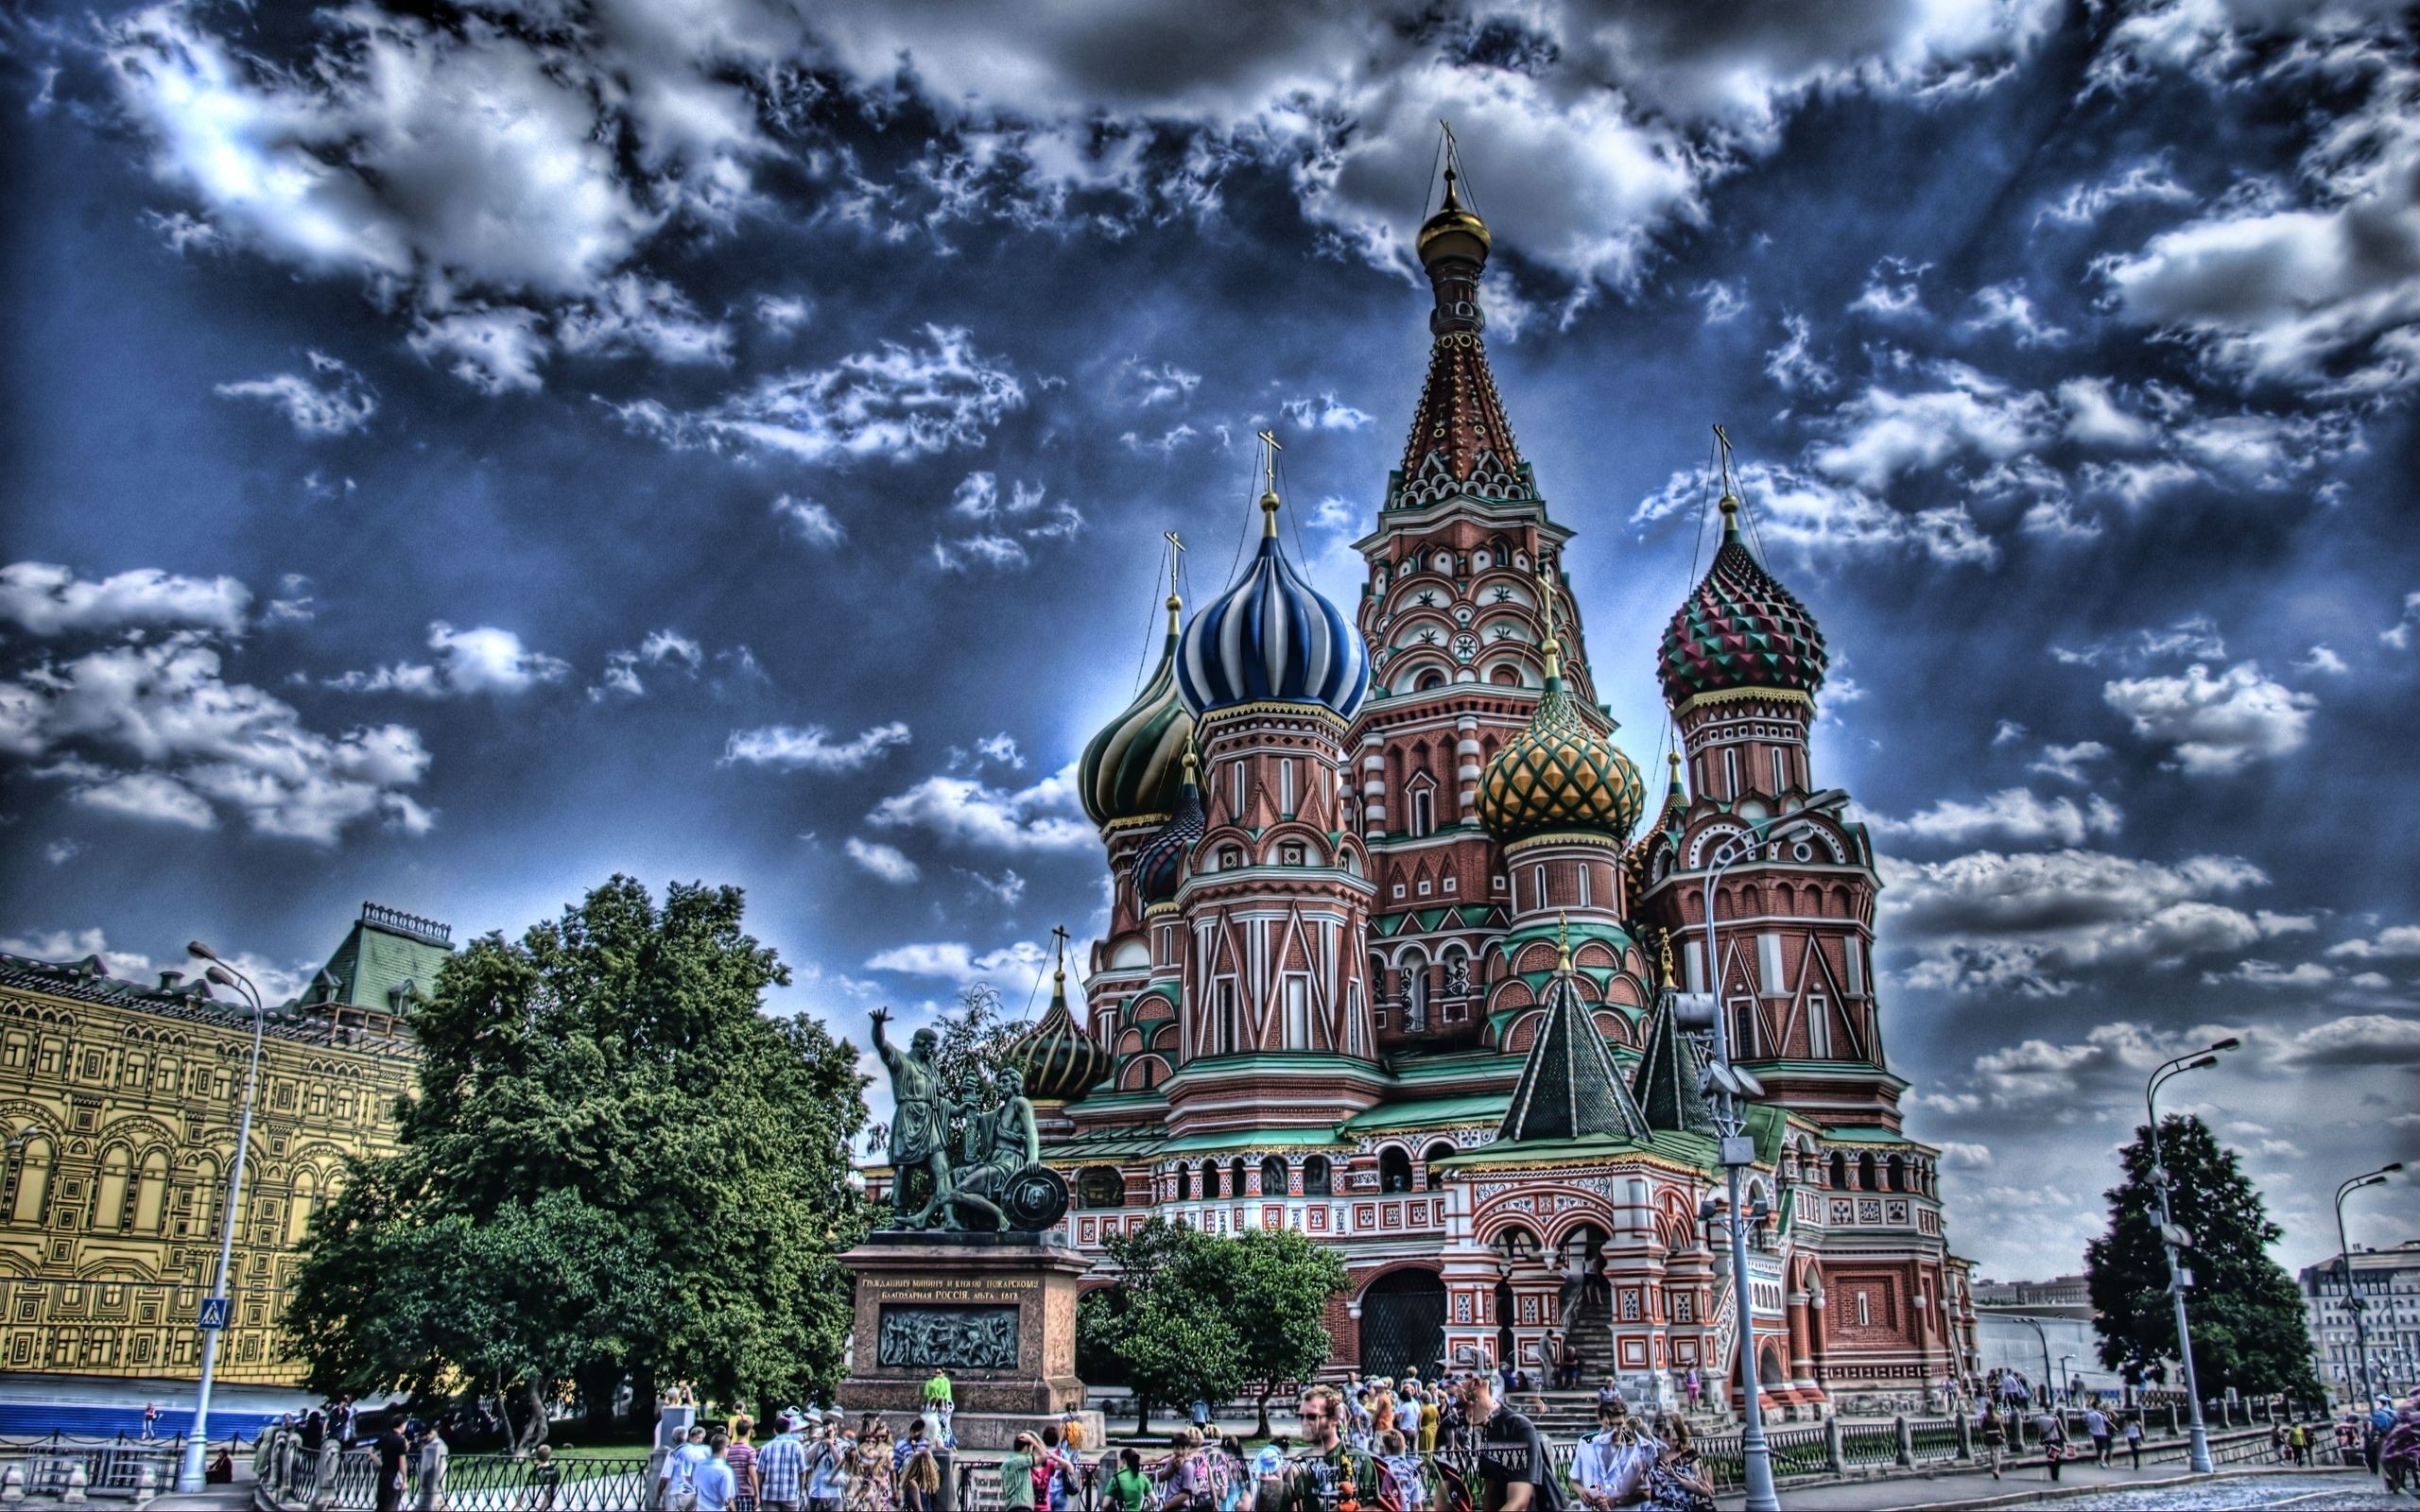 Saint Basil's Cathedral, Captivating wallpapers, Background images, Stunning architecture, 2560x1600 HD Desktop